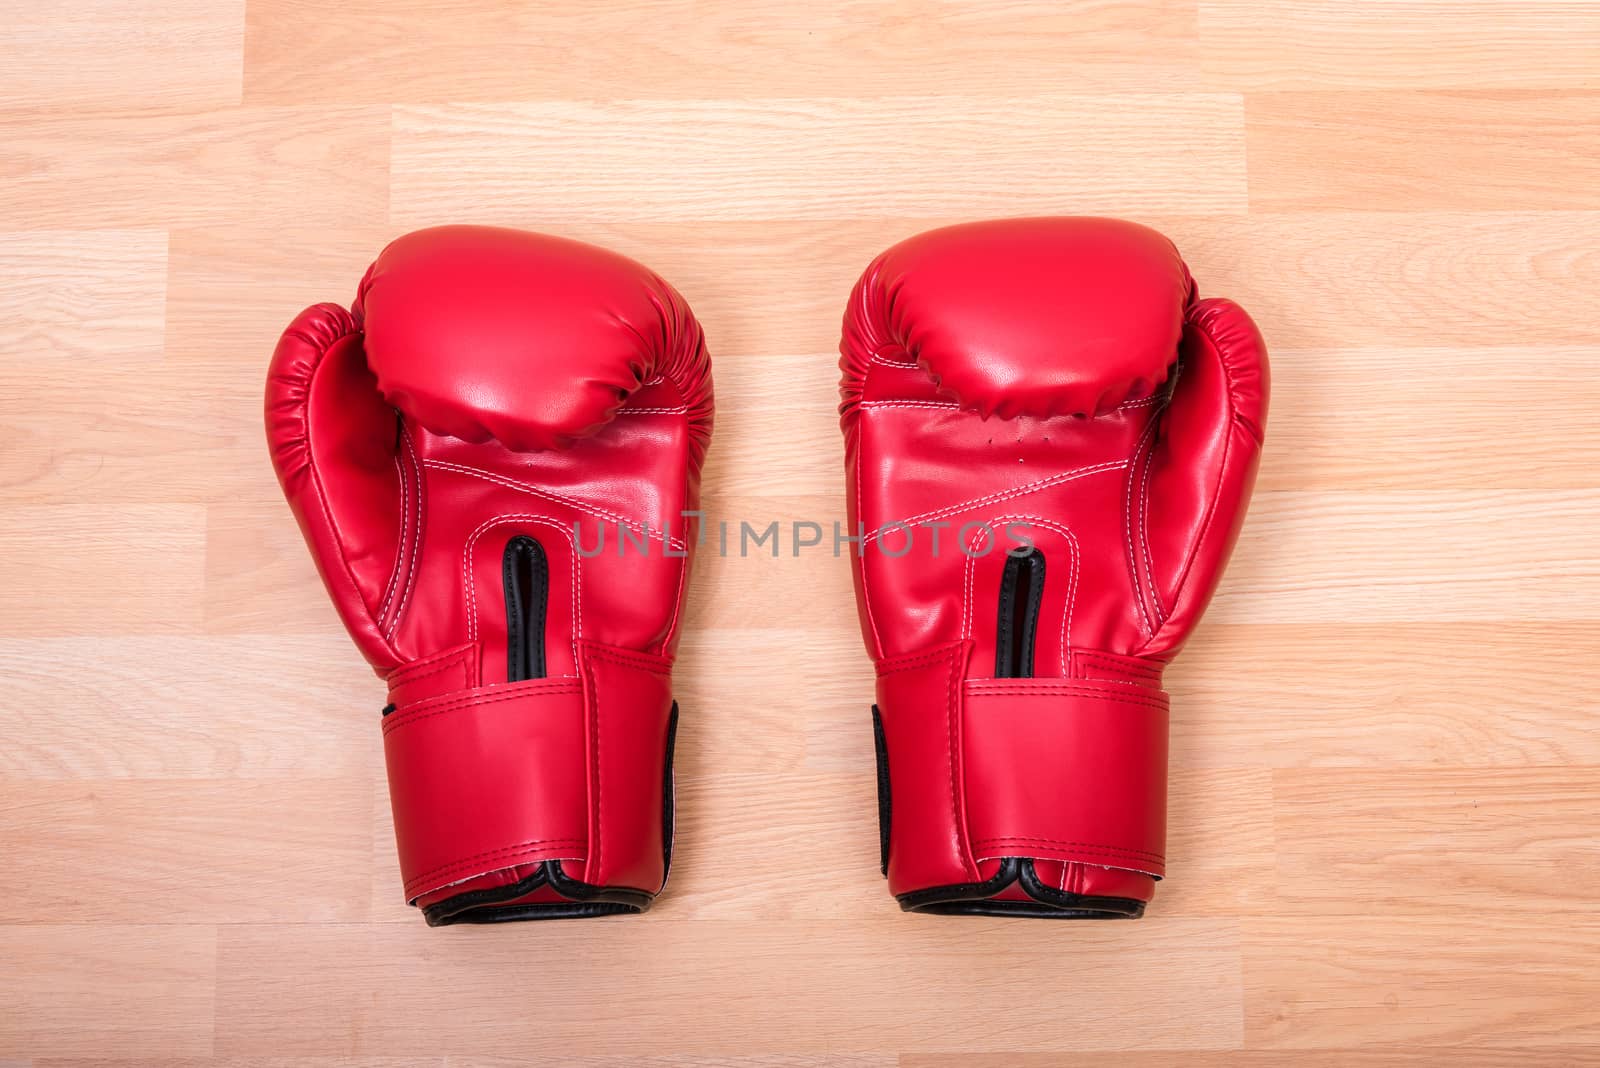 Two red boxing gloves by Sorapop